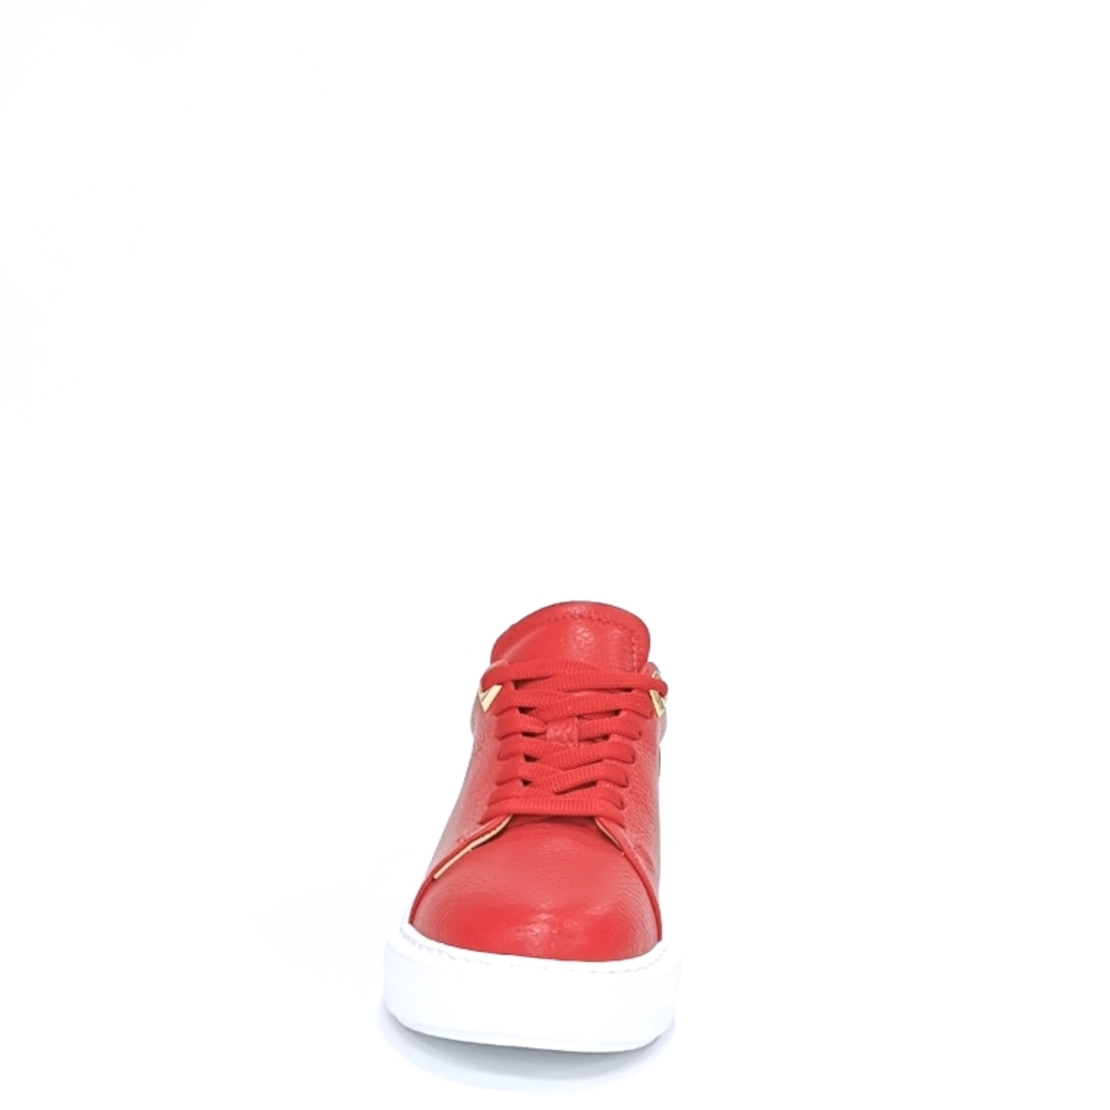 Women's sneaker made of natural leather in red color with anatomical insole/7785